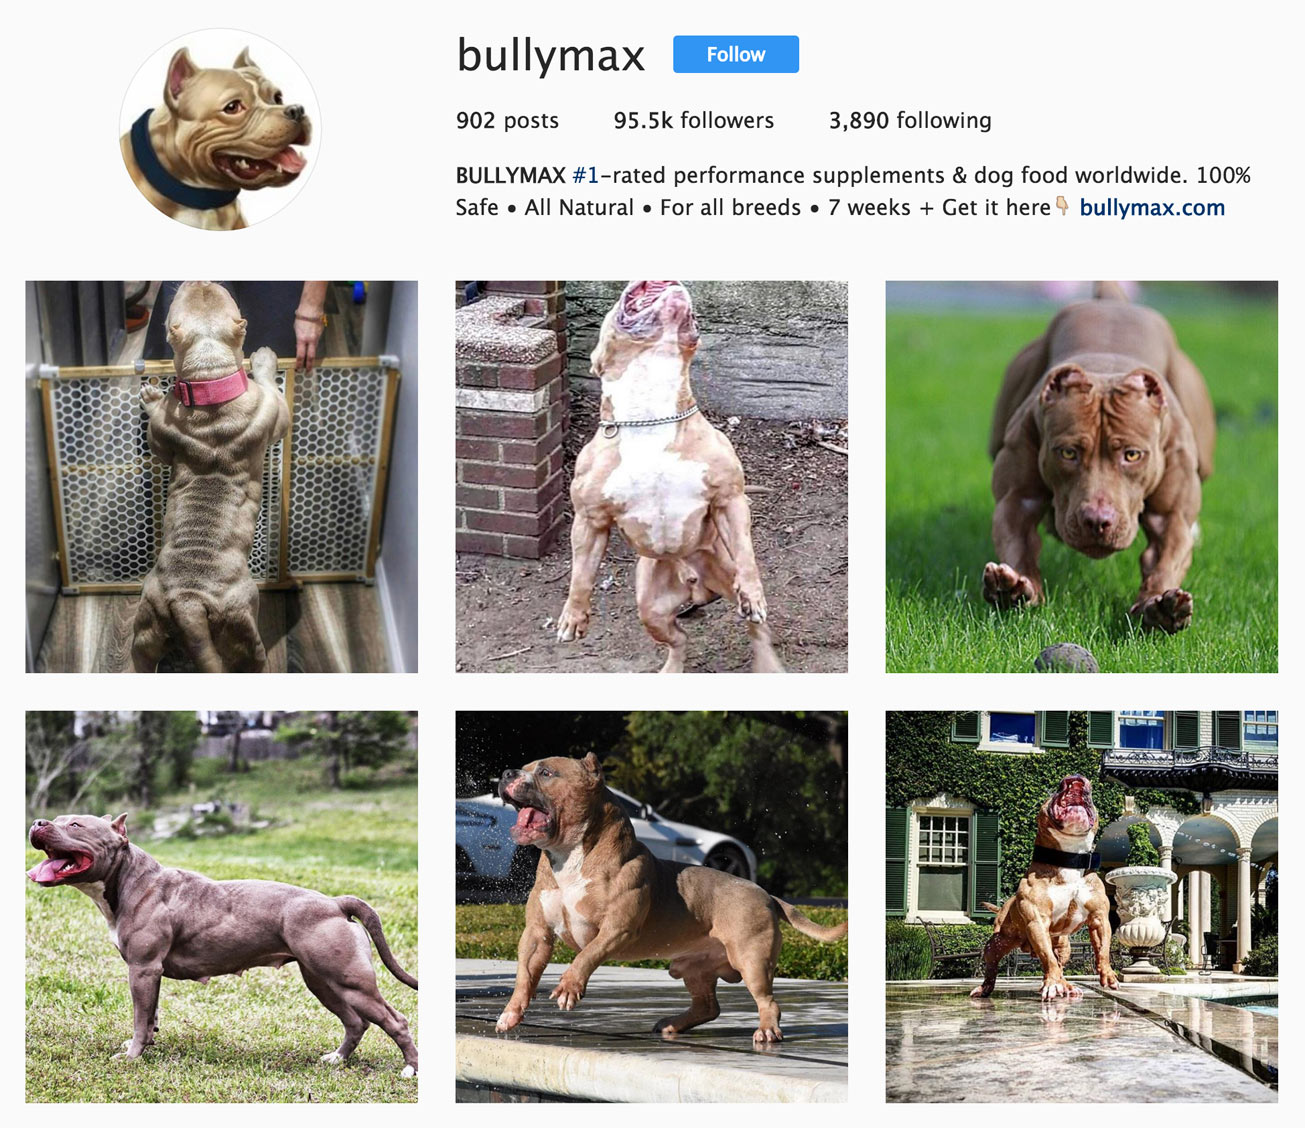 bully max dogs